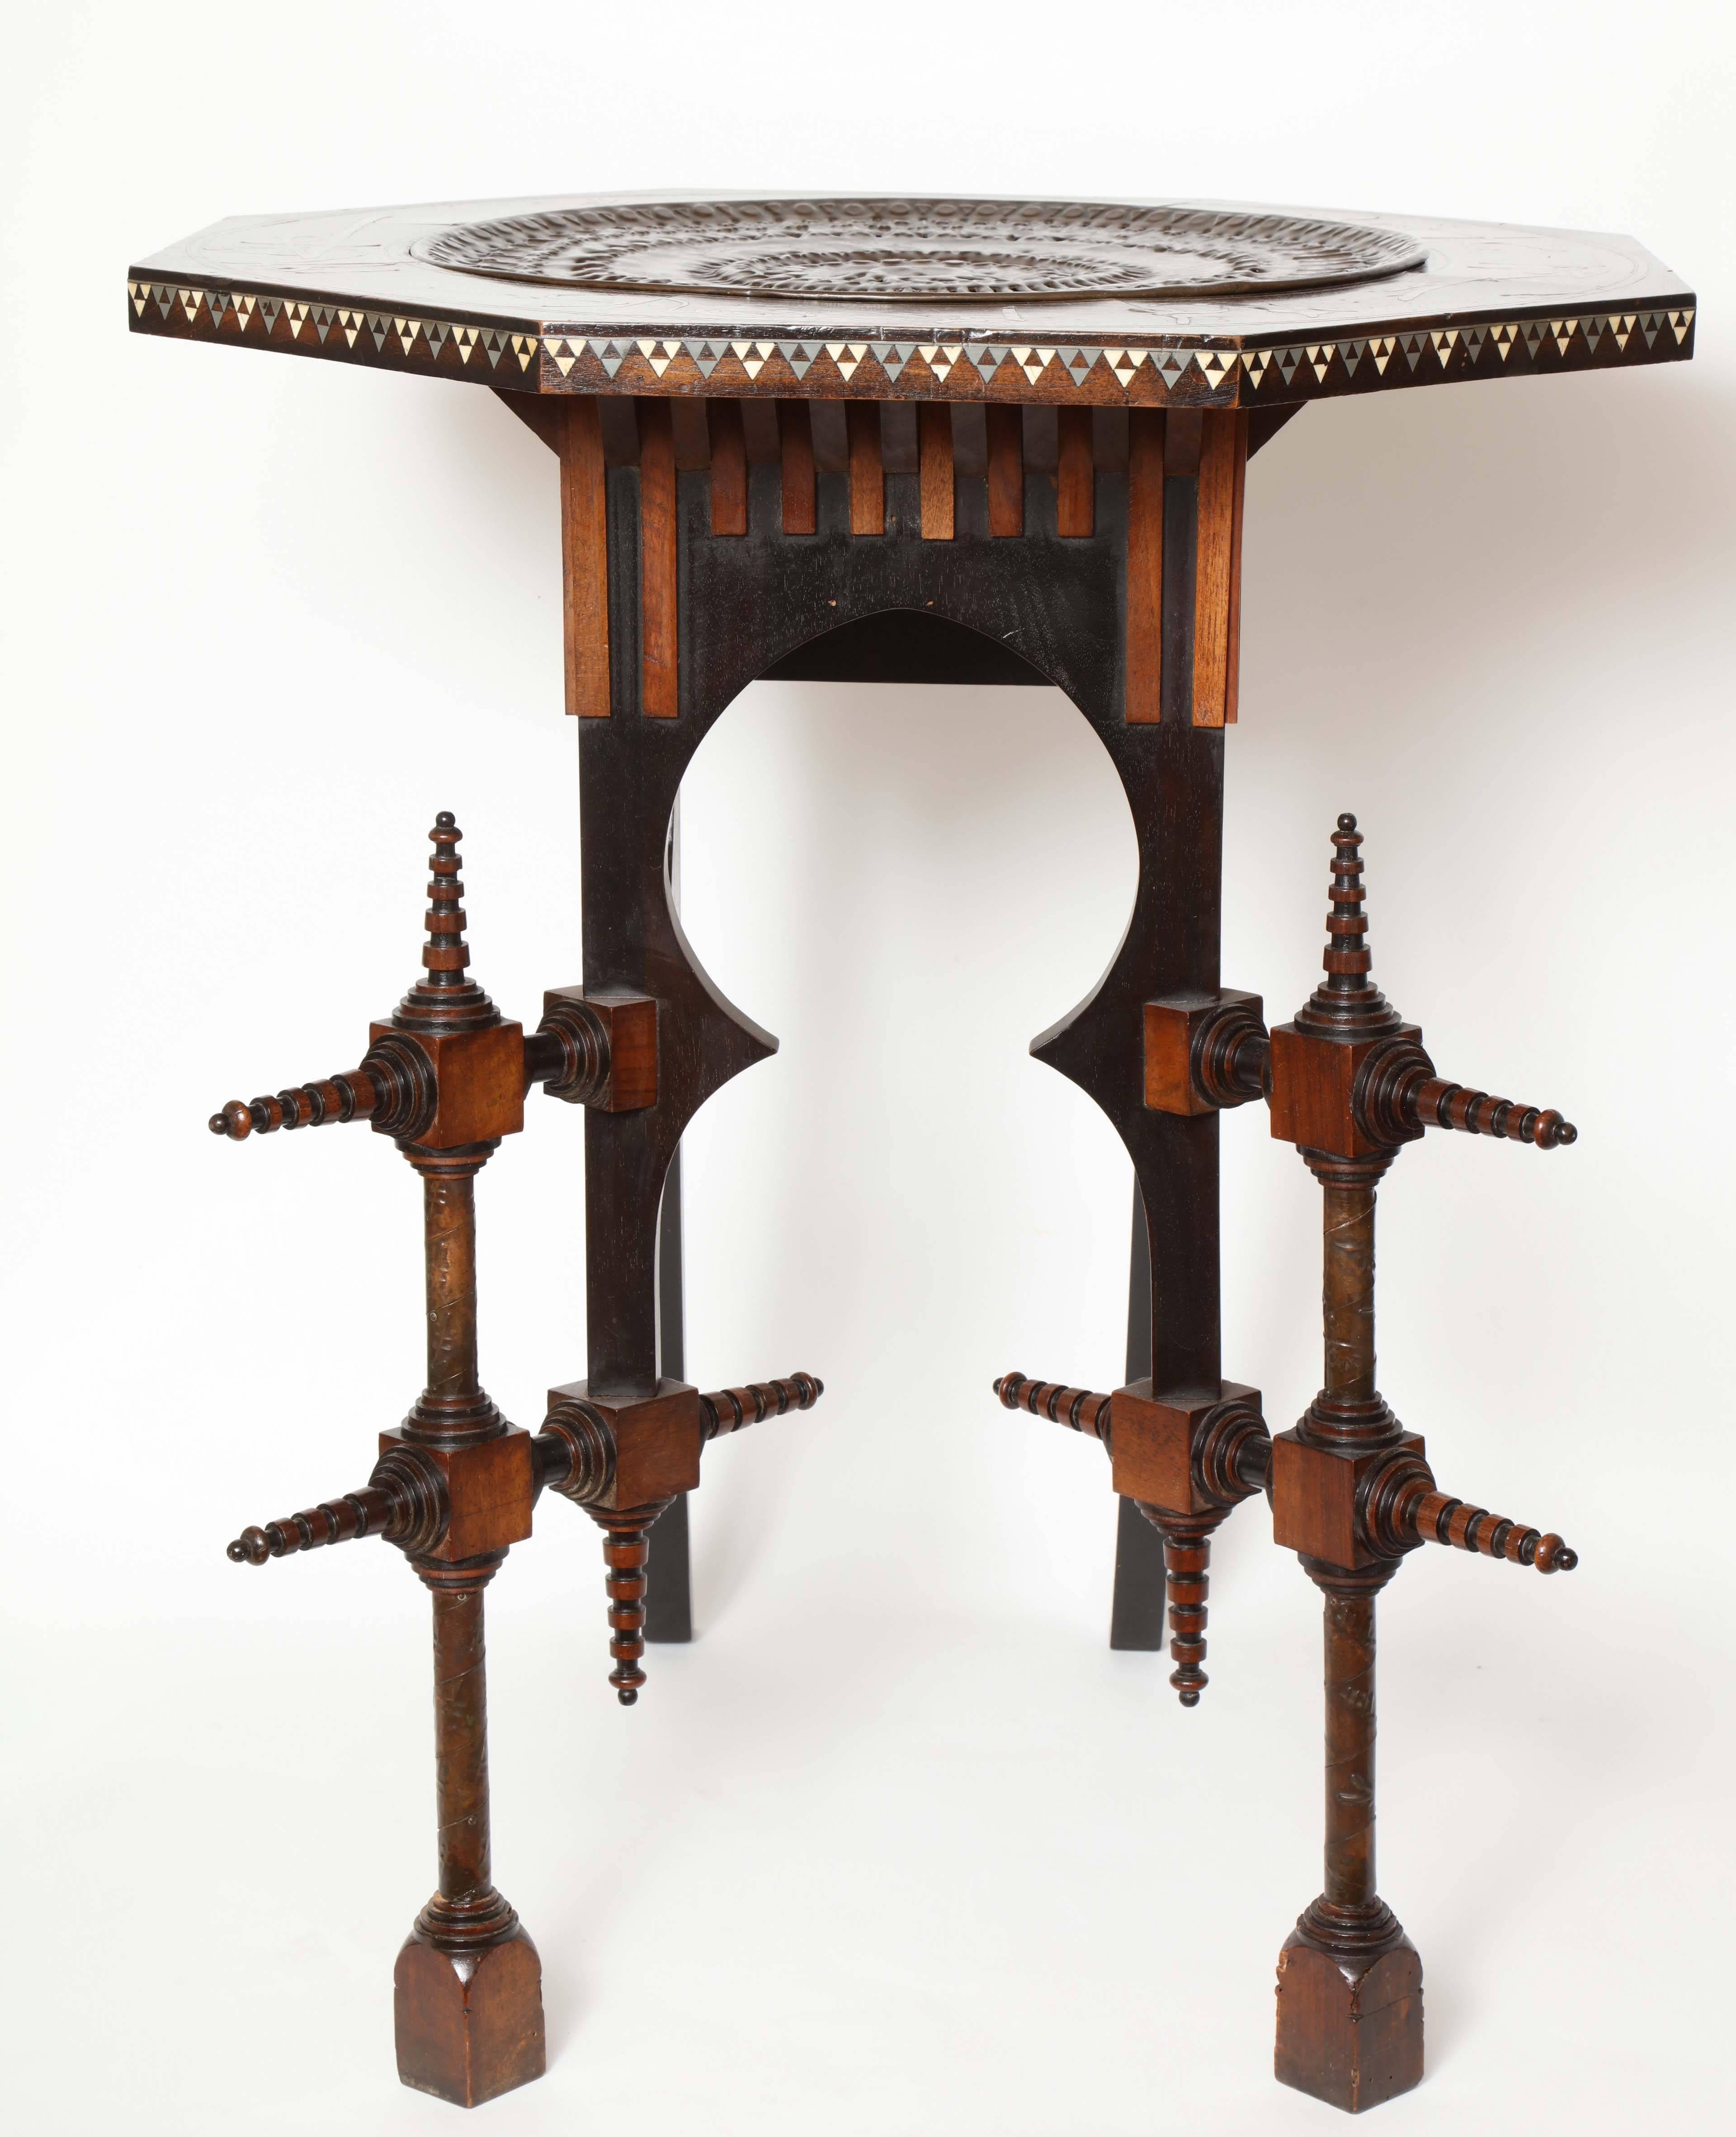 A Pewter inlaid, Italian walnut and ebonized wood, octagonal occasional table,
circa 1898, made in his Milano Studio. The table has a hand-hammered
16.75 inch round removable copper tray and stylized inlaid Pewter Characters and geometric inlay